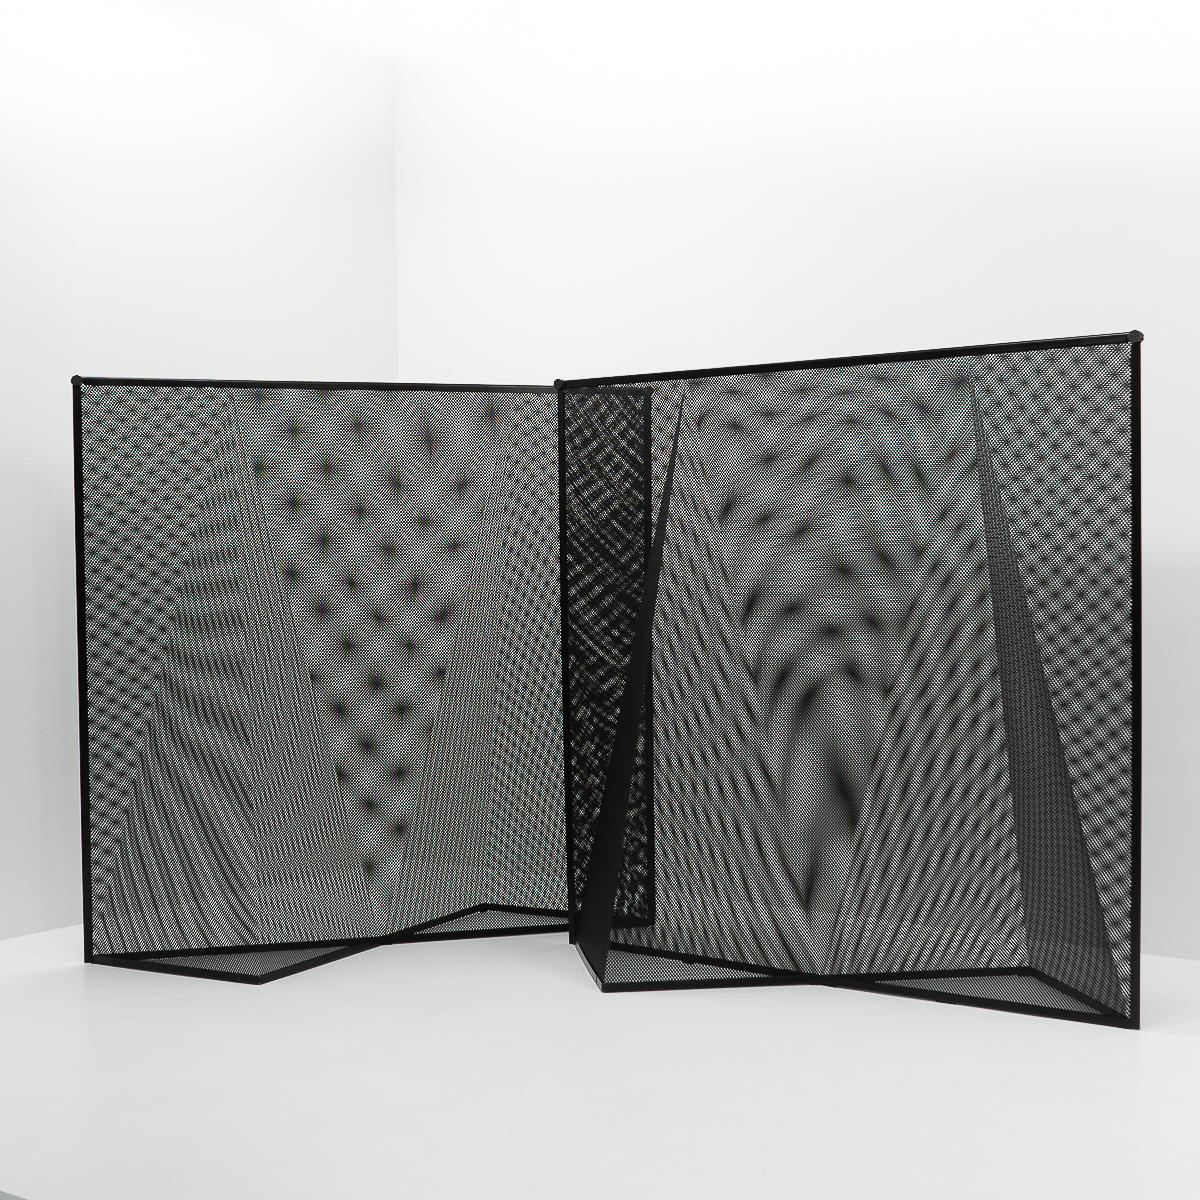 Postmodern Room Dividers / Paravents, Nilla Rosa by Mario Botta for Alias, 1980s For Sale 7